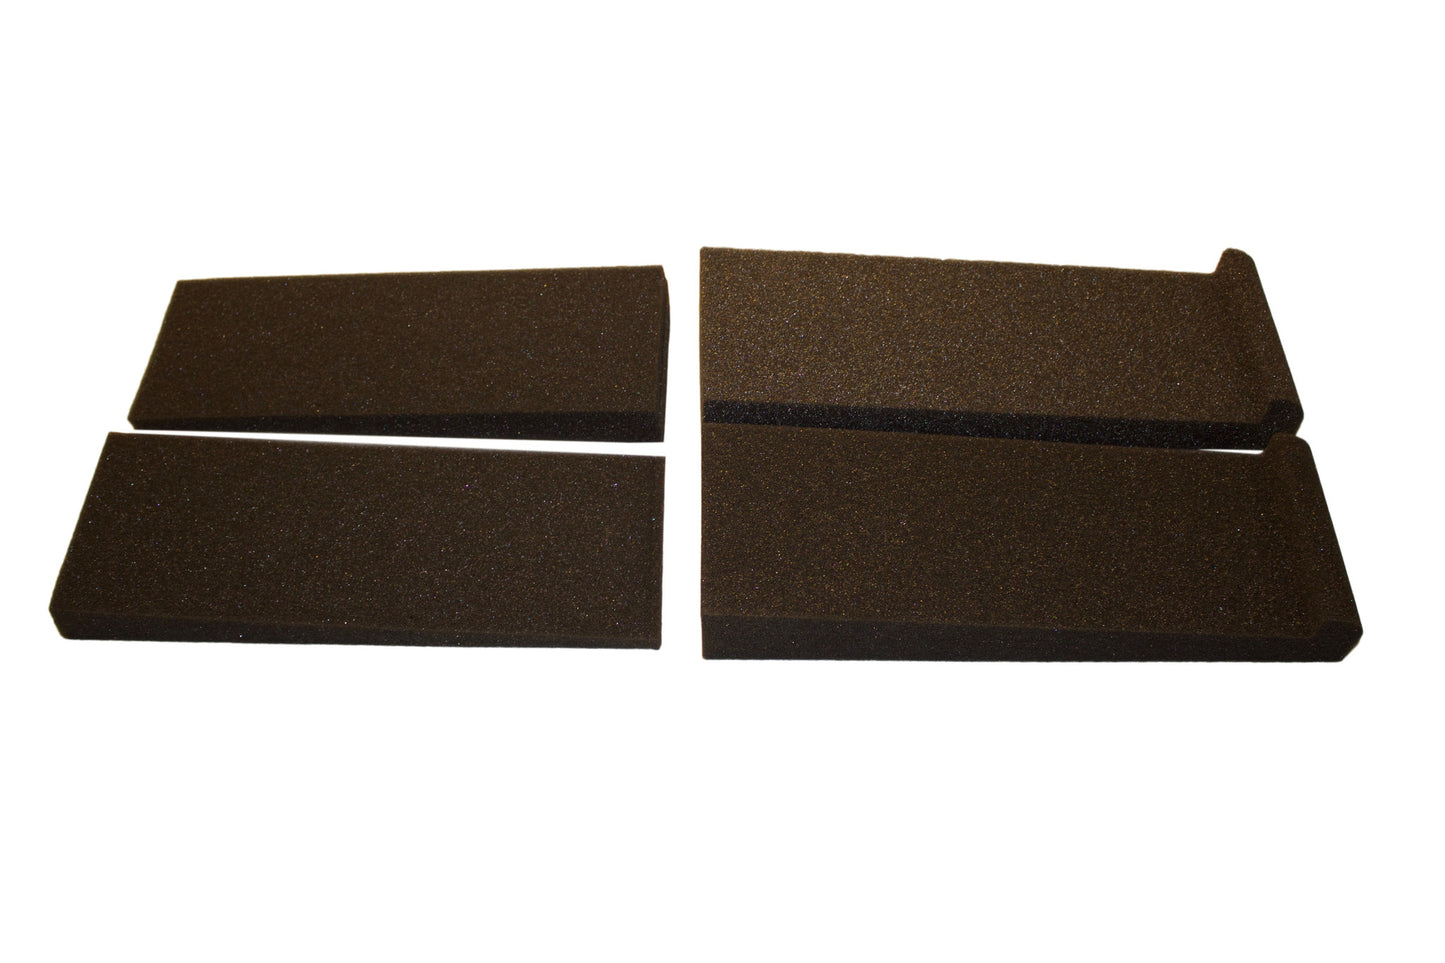 Monitor Isolation Pads For Subs And Speakers - Studio Acoustic Foam Stands